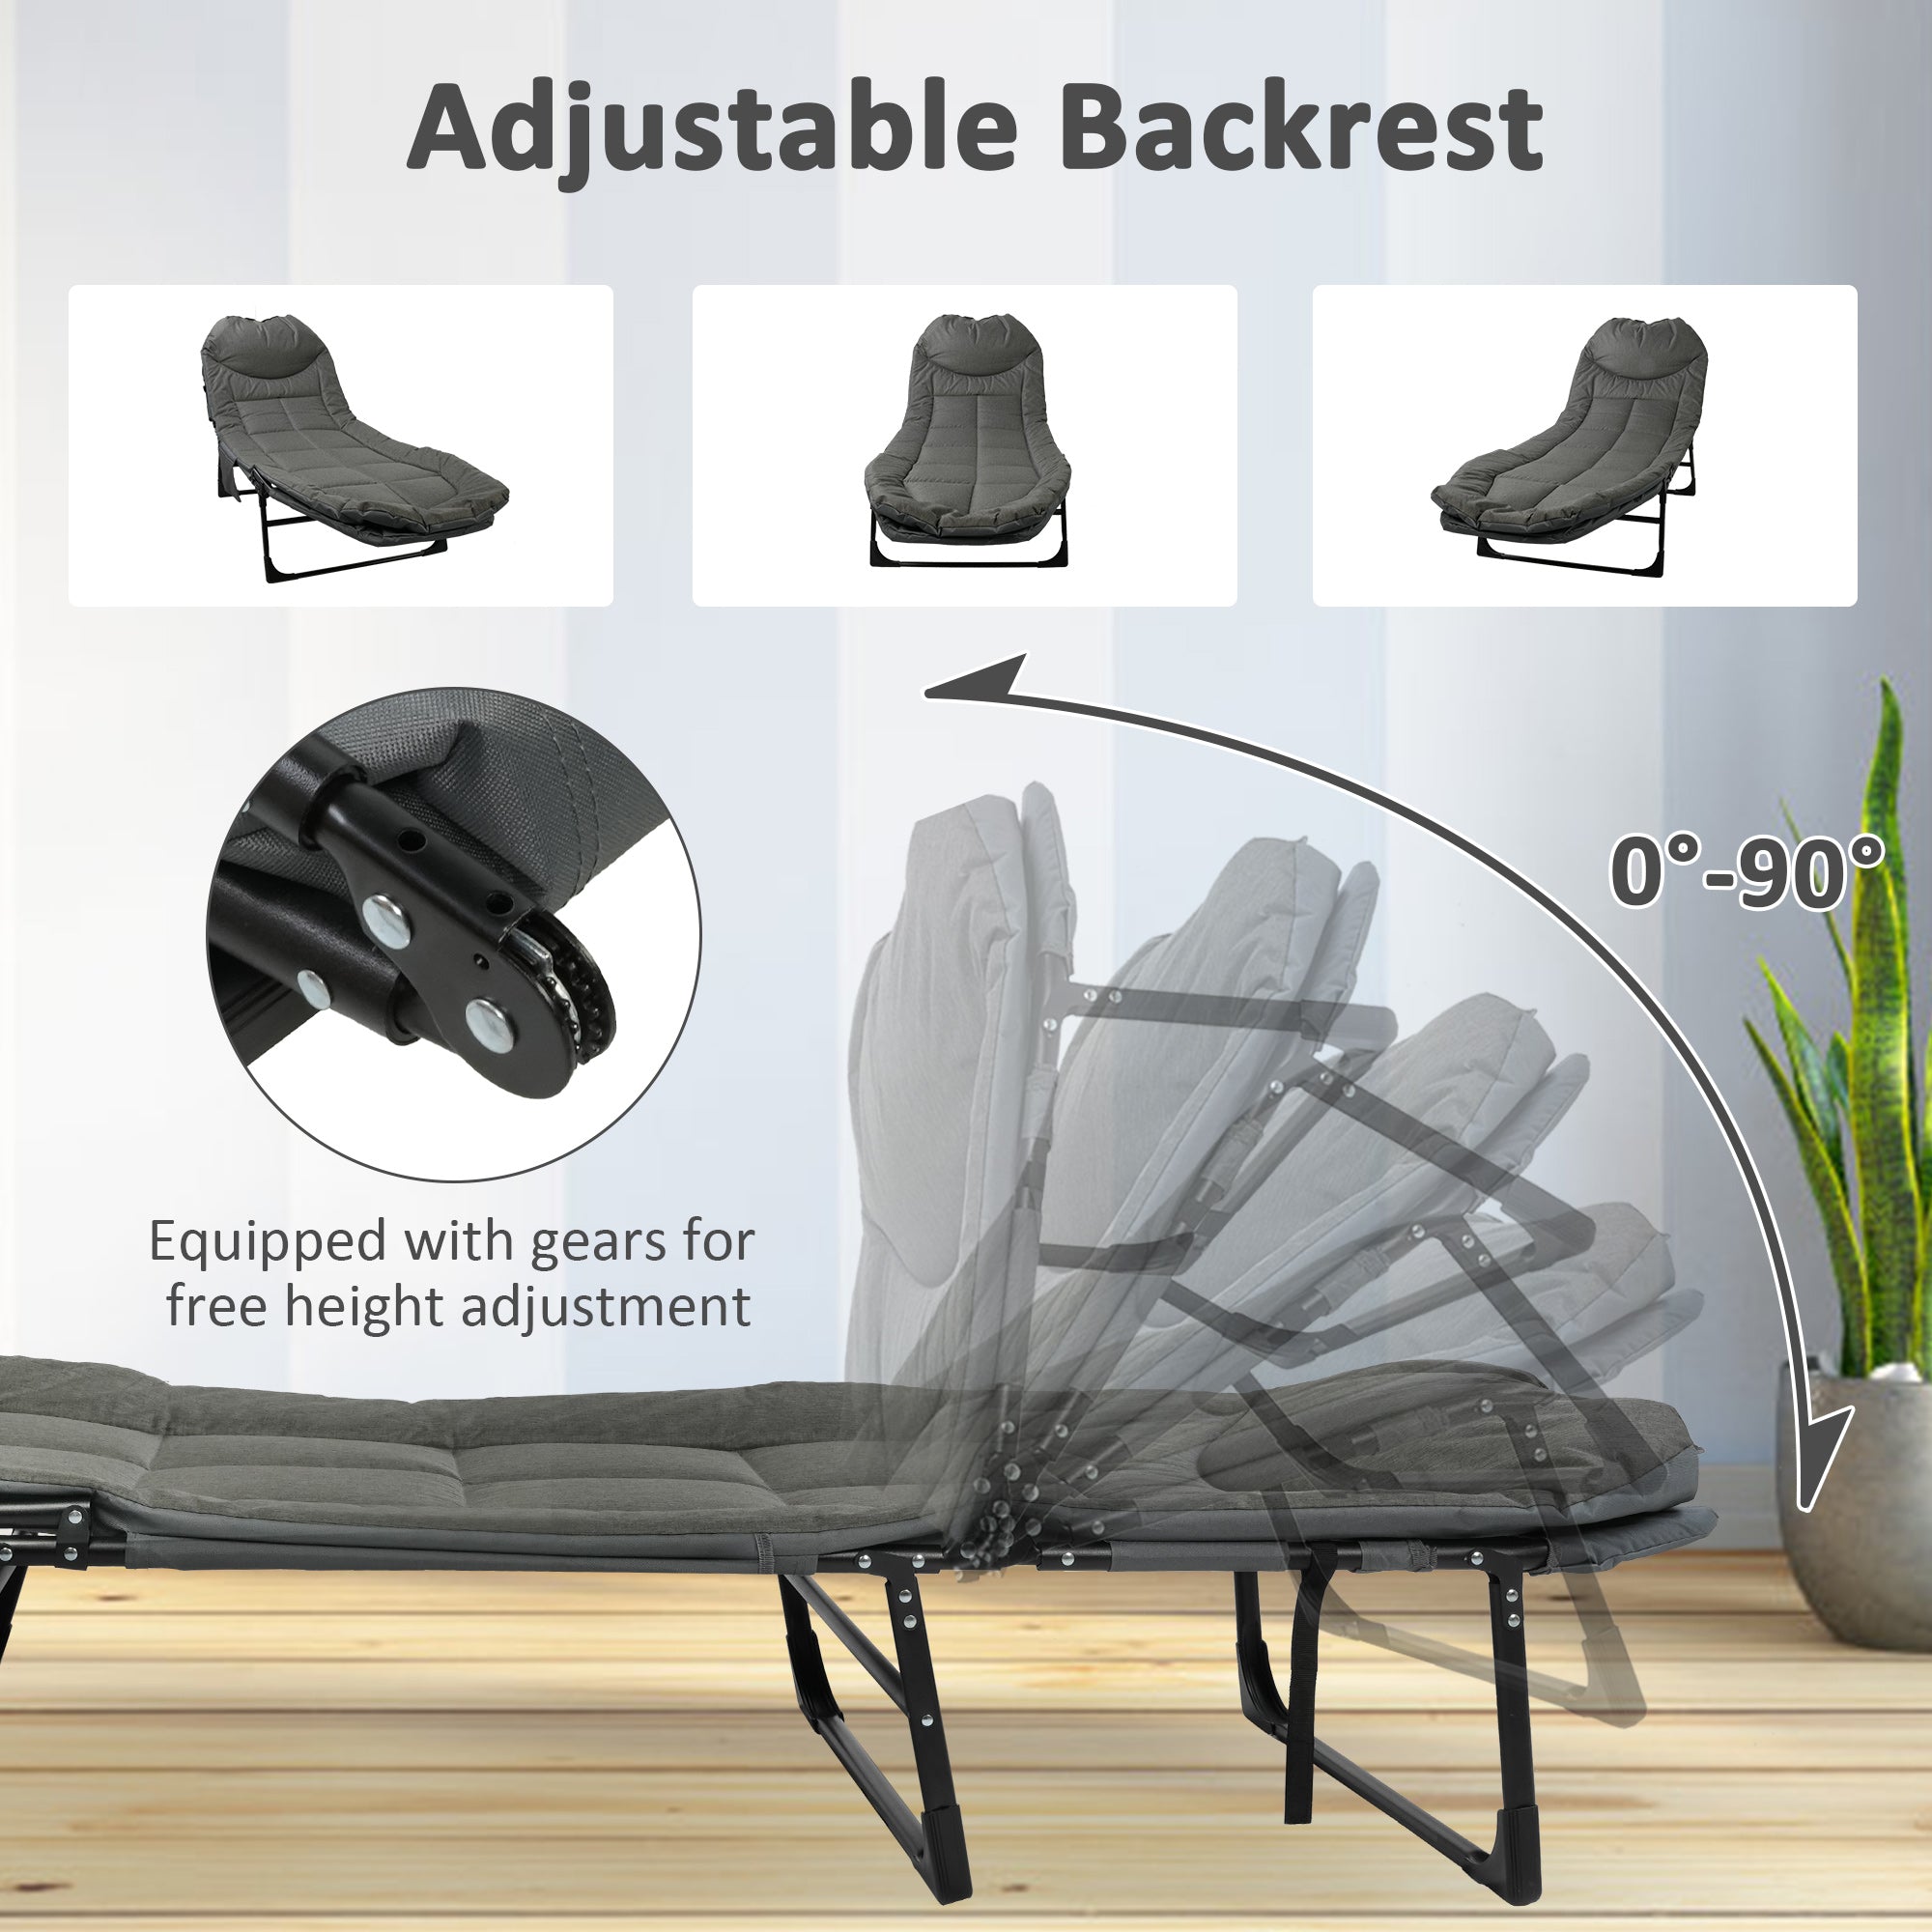 Portable Folding Camping Cots Sleeping Cots with Mattress and Adjustable Backrest, Gray